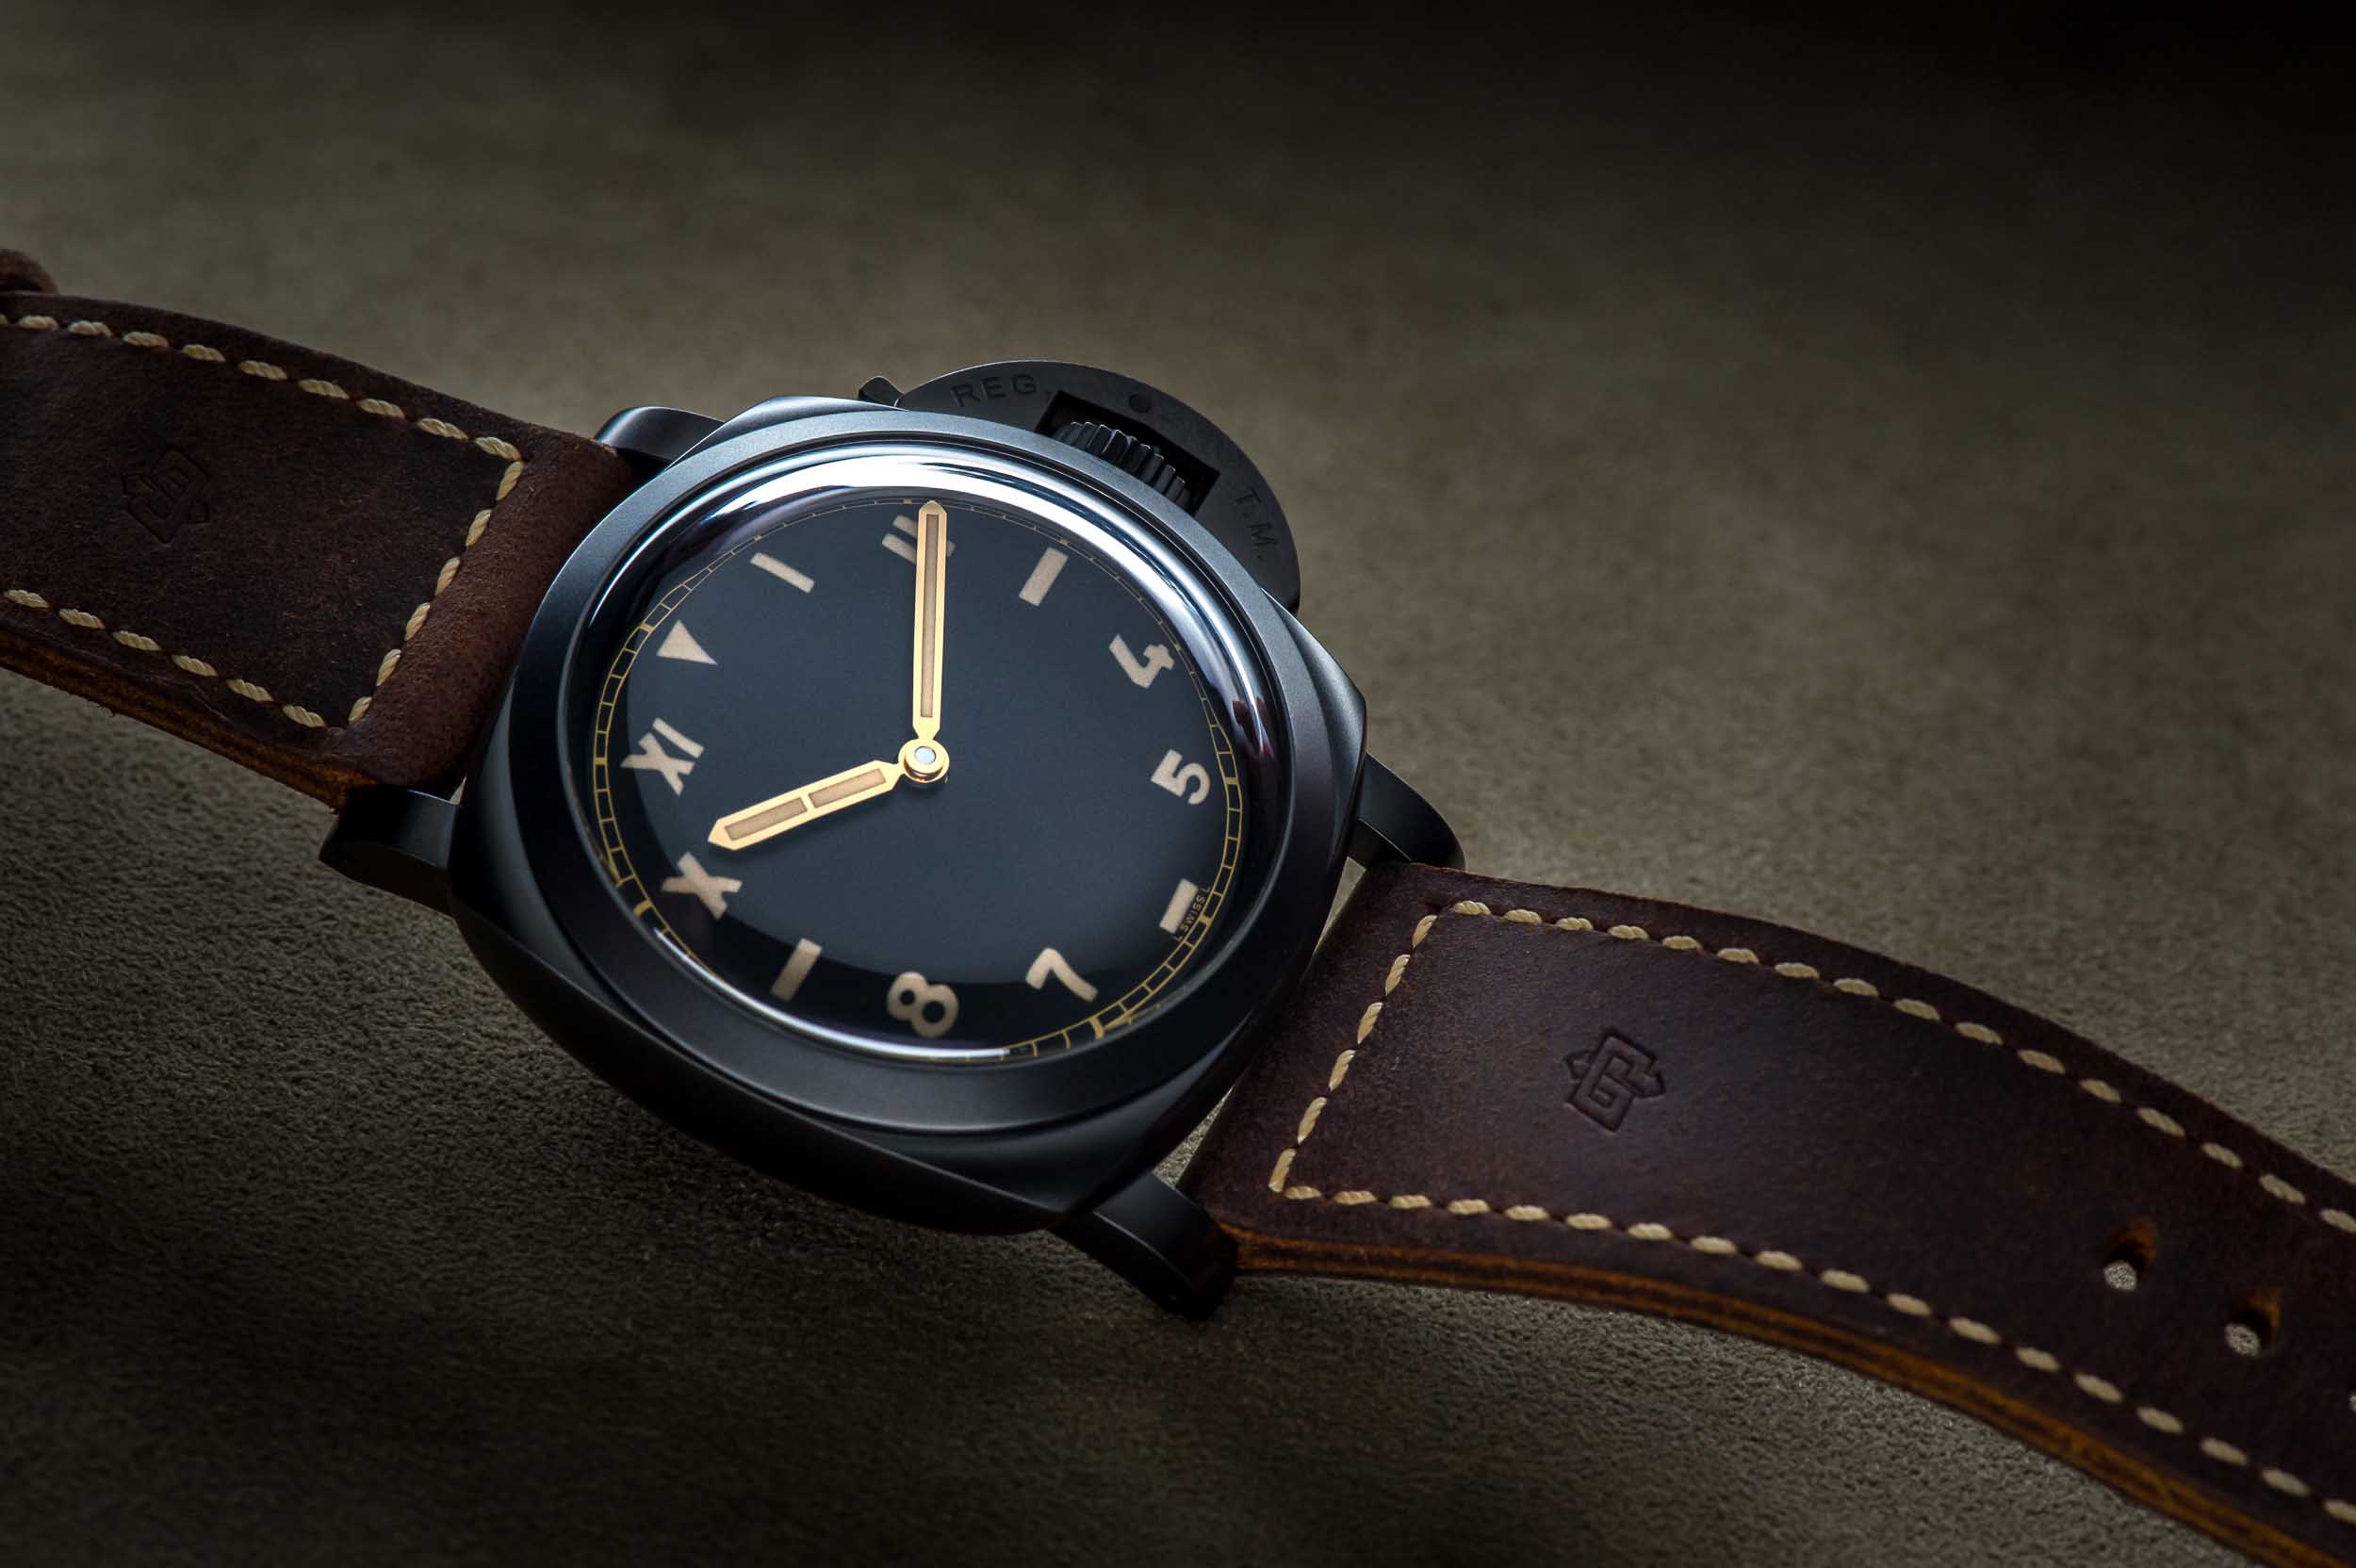 Introducing The Panerai Luminor 1950 3 Days Titanio DLC 47MM (Live Pictures From Watches & Wonders 2015)